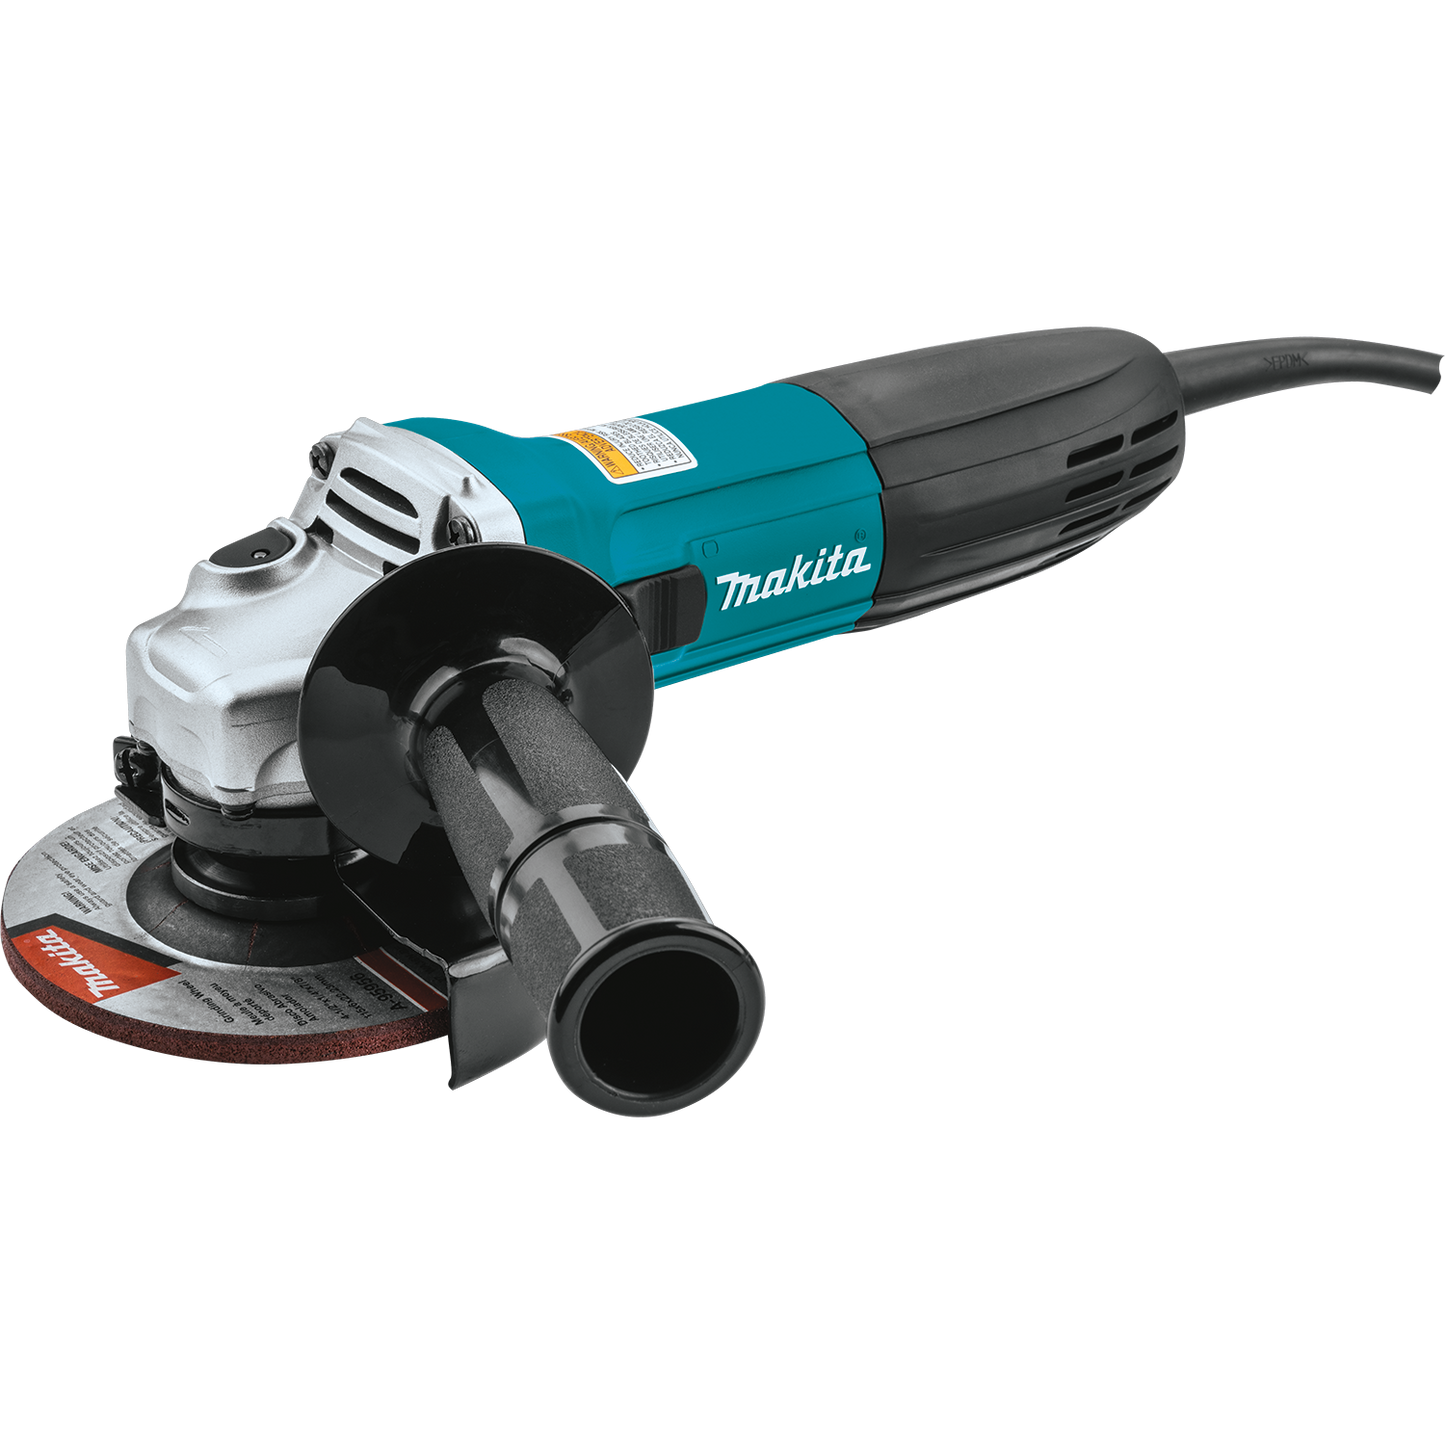 Makita 4 1/2 Inch Angle Grinder Factory Serviced